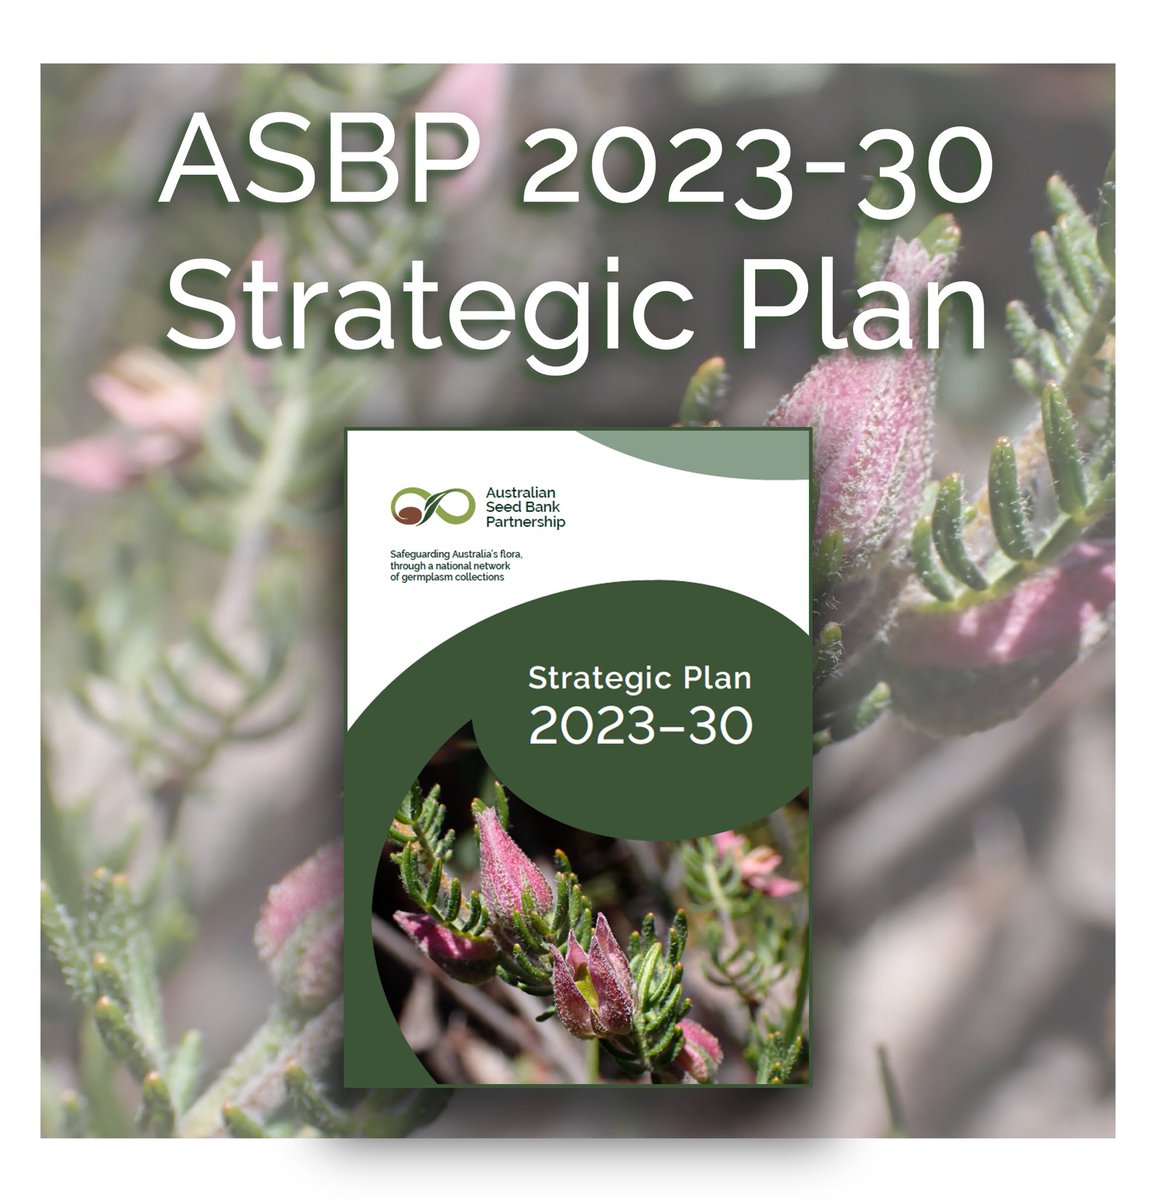 Announcing the release of our latest Strategic Plan! This document will guide us to conserve #nativeplants through #seedbanking & use 🌱, #research 🧪, and #knowledgesharing 📖. Have a read! 🔗 seedpartnership.org.au/about-us/strat…